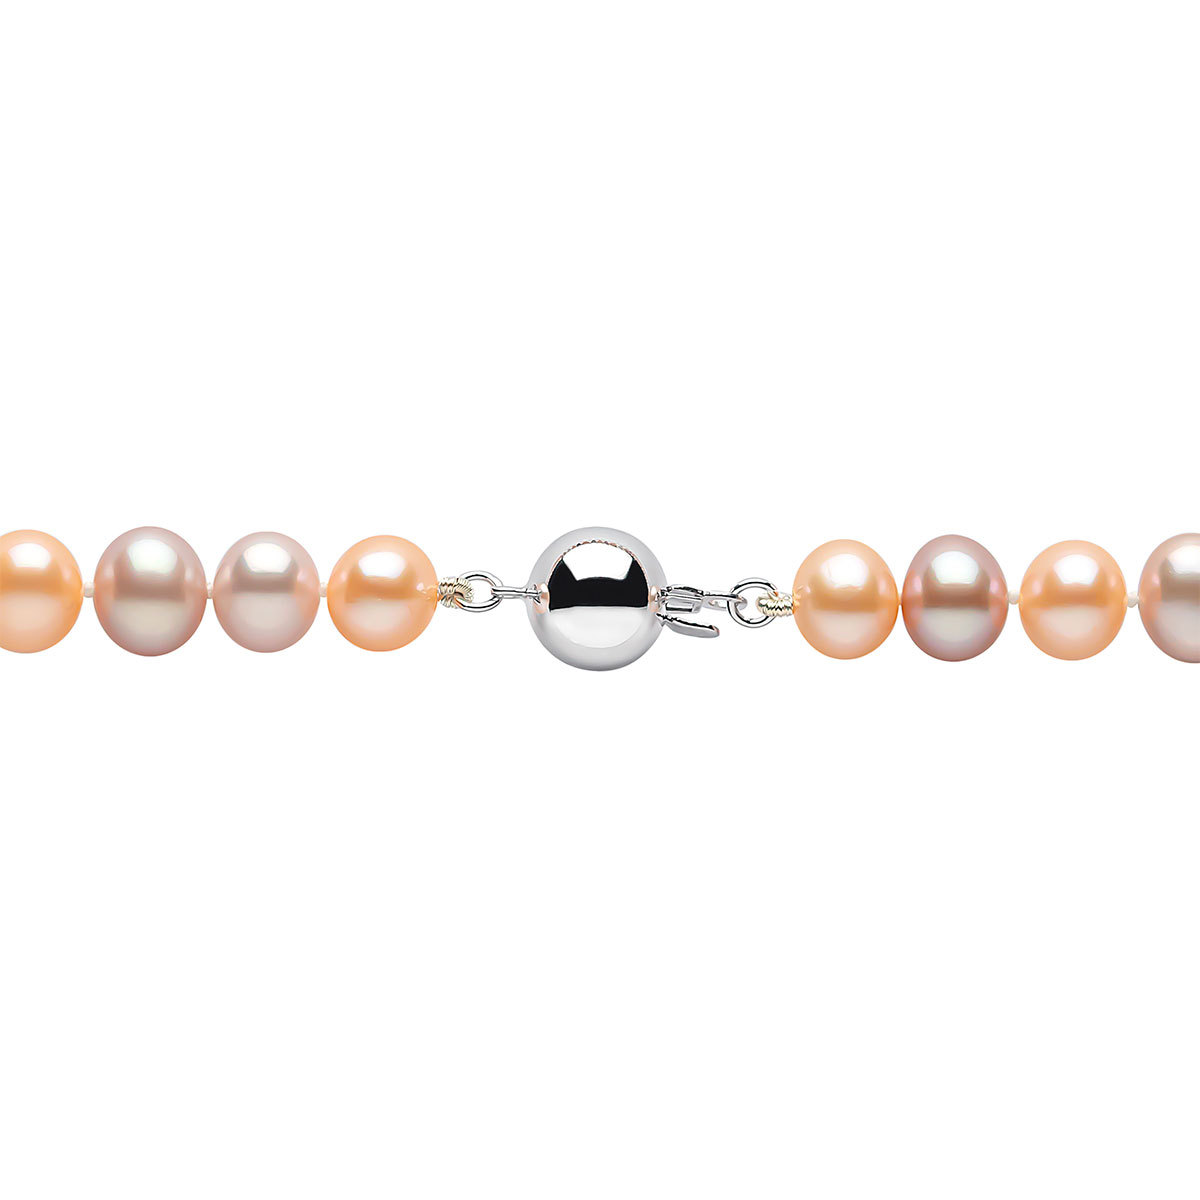 6-6.5mm Cultured Freshwater Multi Colour Pearl Bracelet, 18ct White Gold